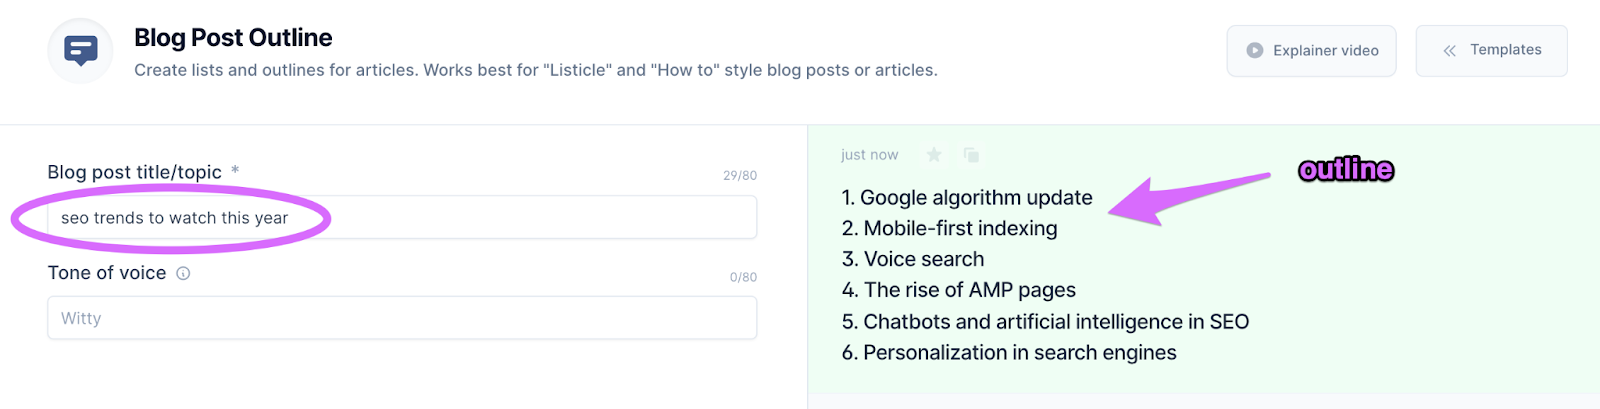 blog outline generator results based on title of your article